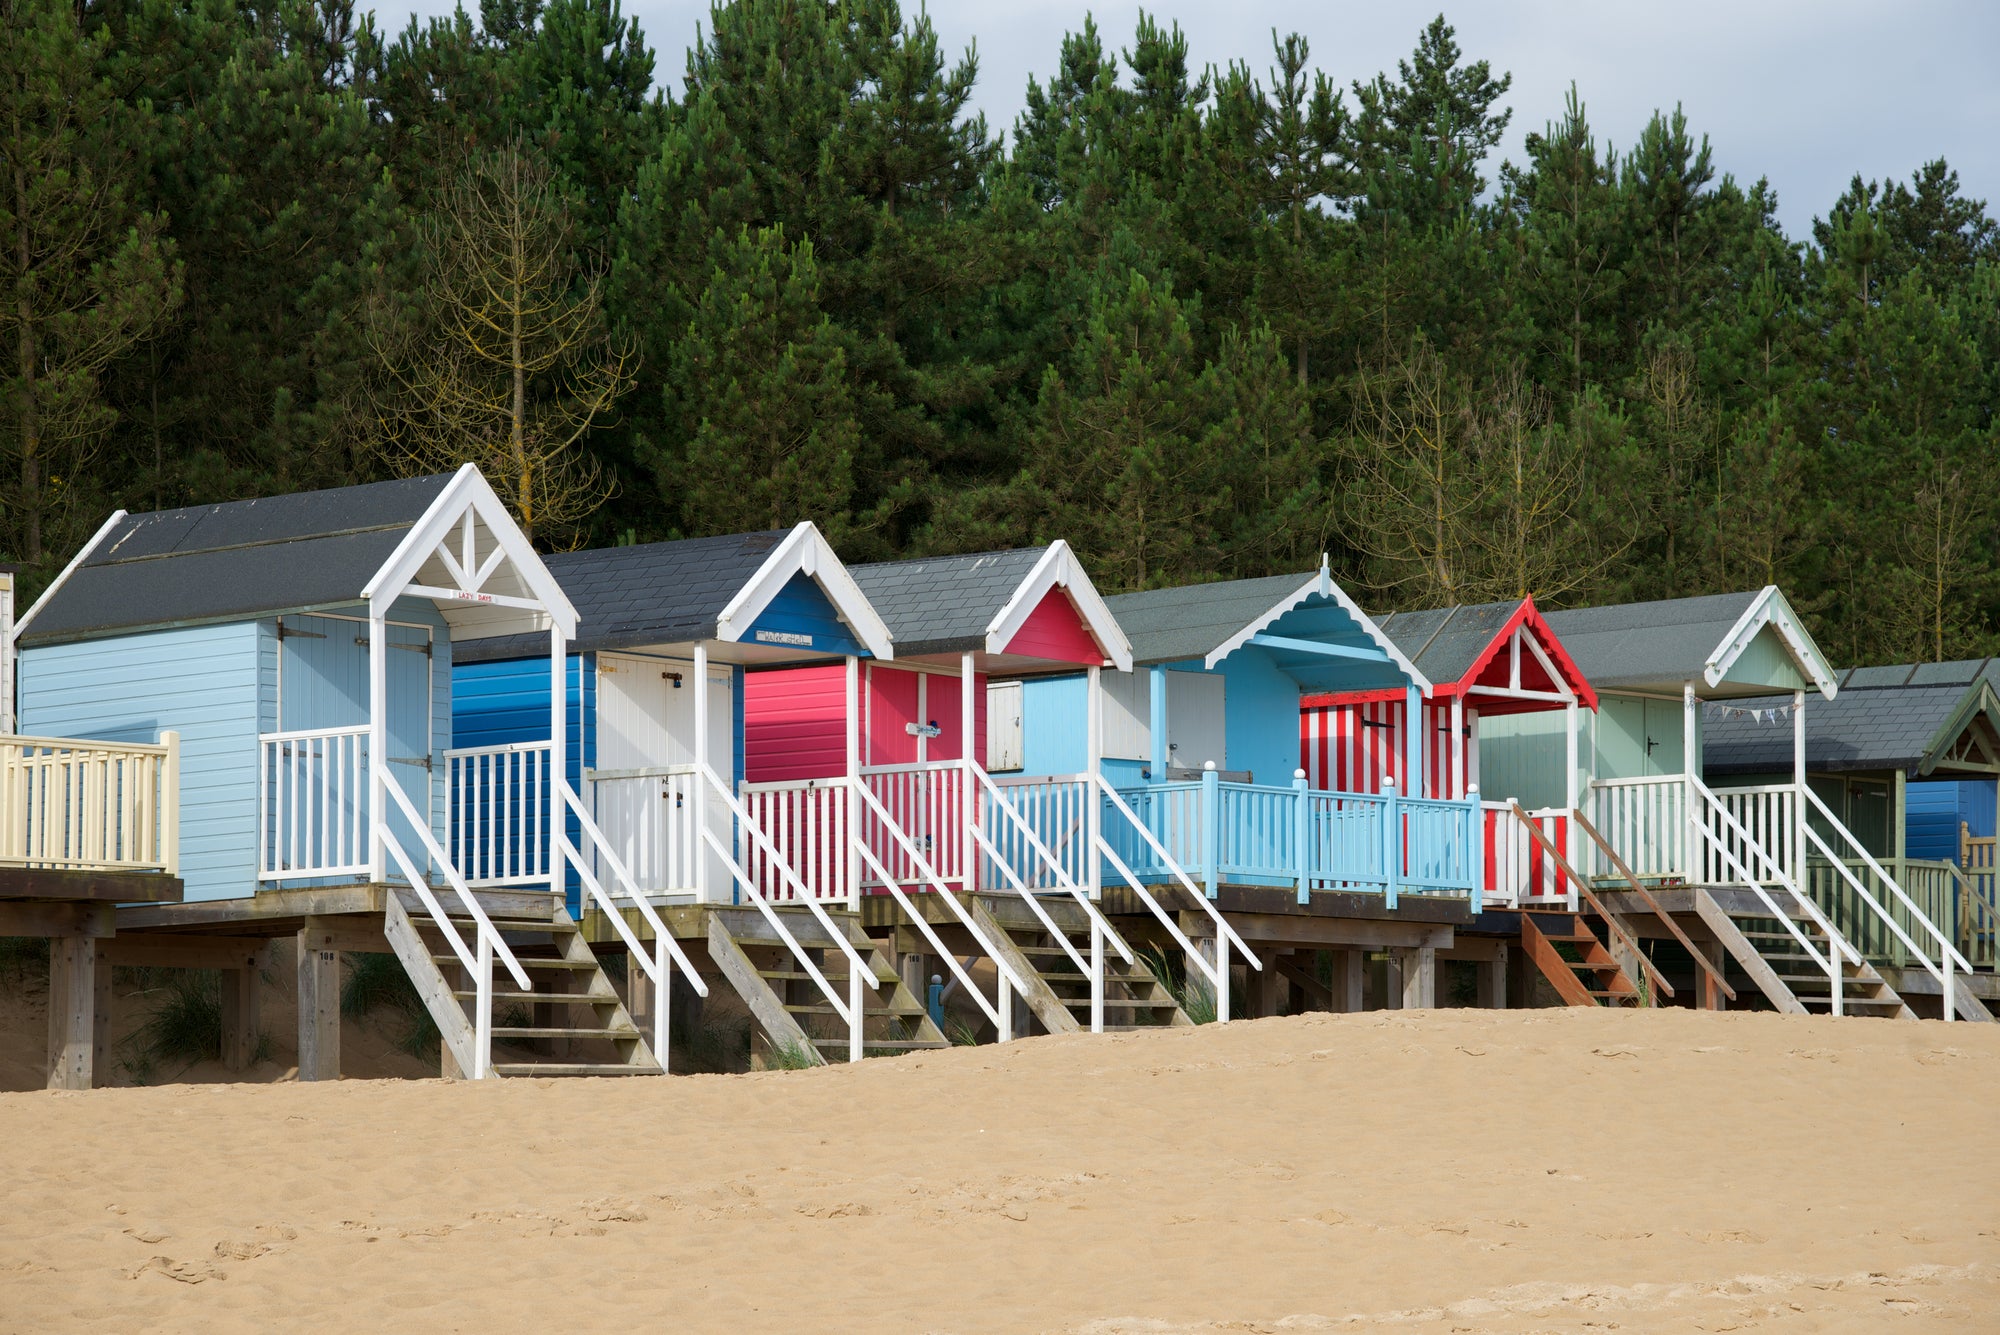 Places to visit - Wells-Next-The-Sea